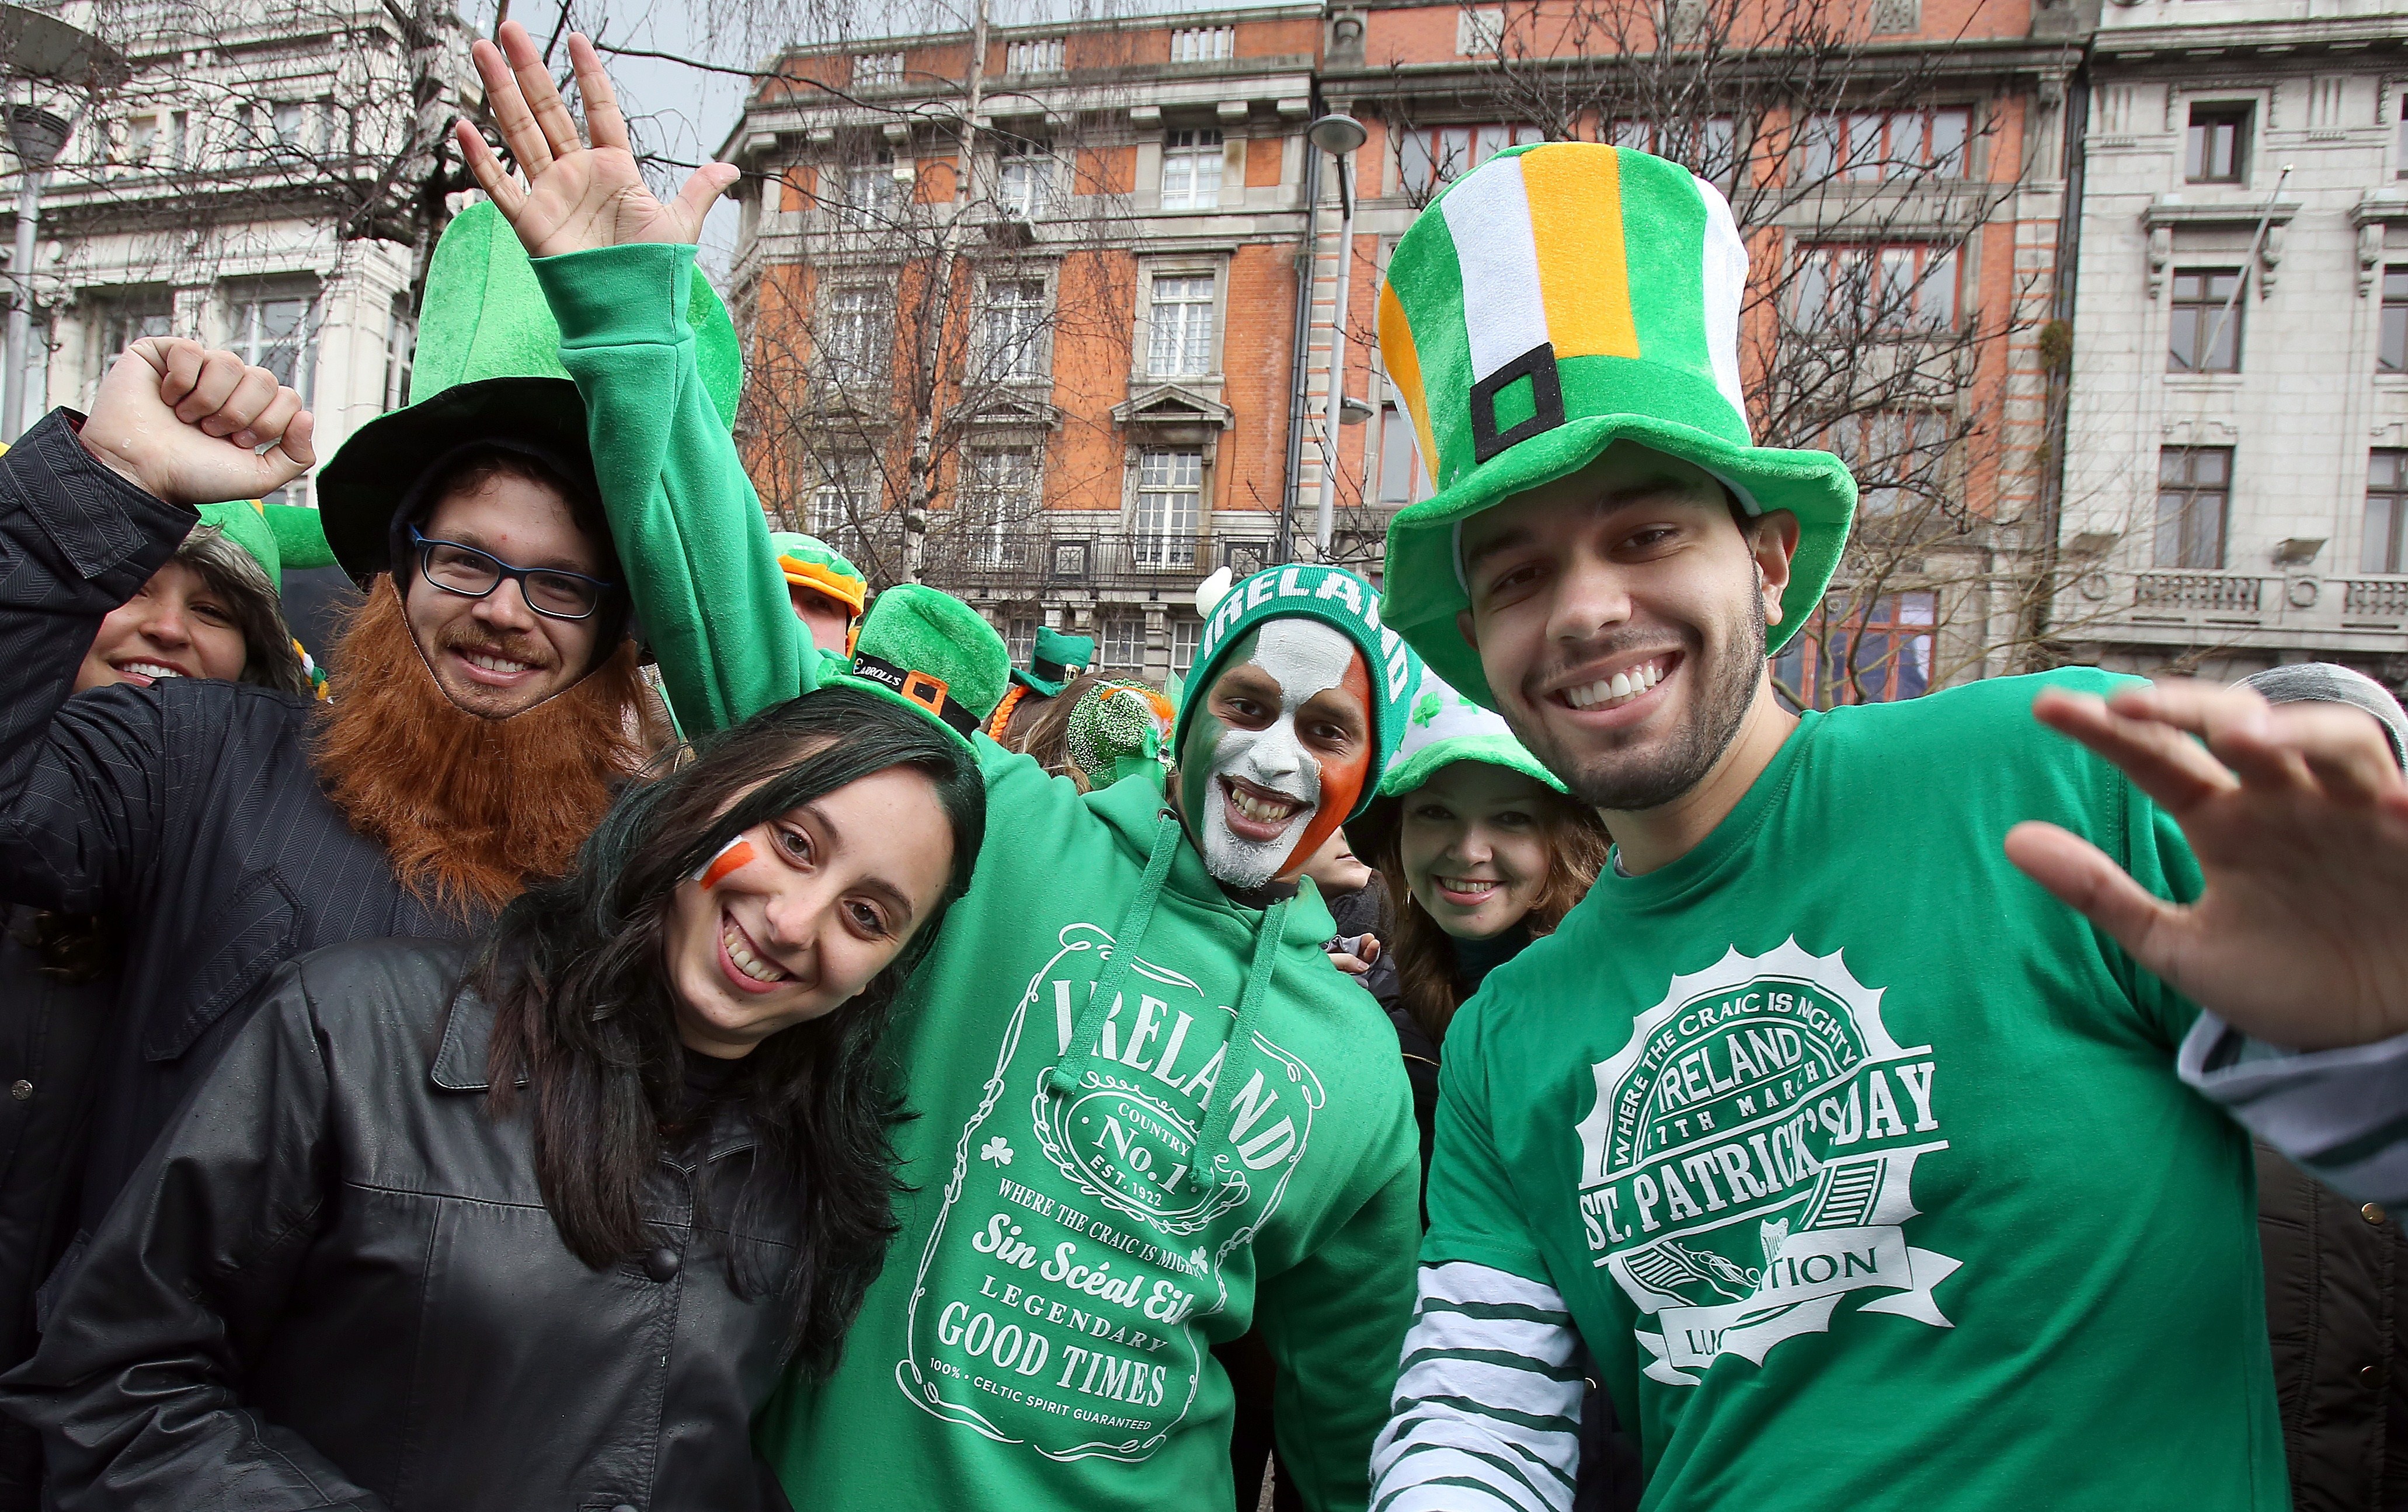 Revellers pose for pictures as they take part in the St Patrick's Day Parade in Dublin, Ireland, on March 17, 2015. (Getty)